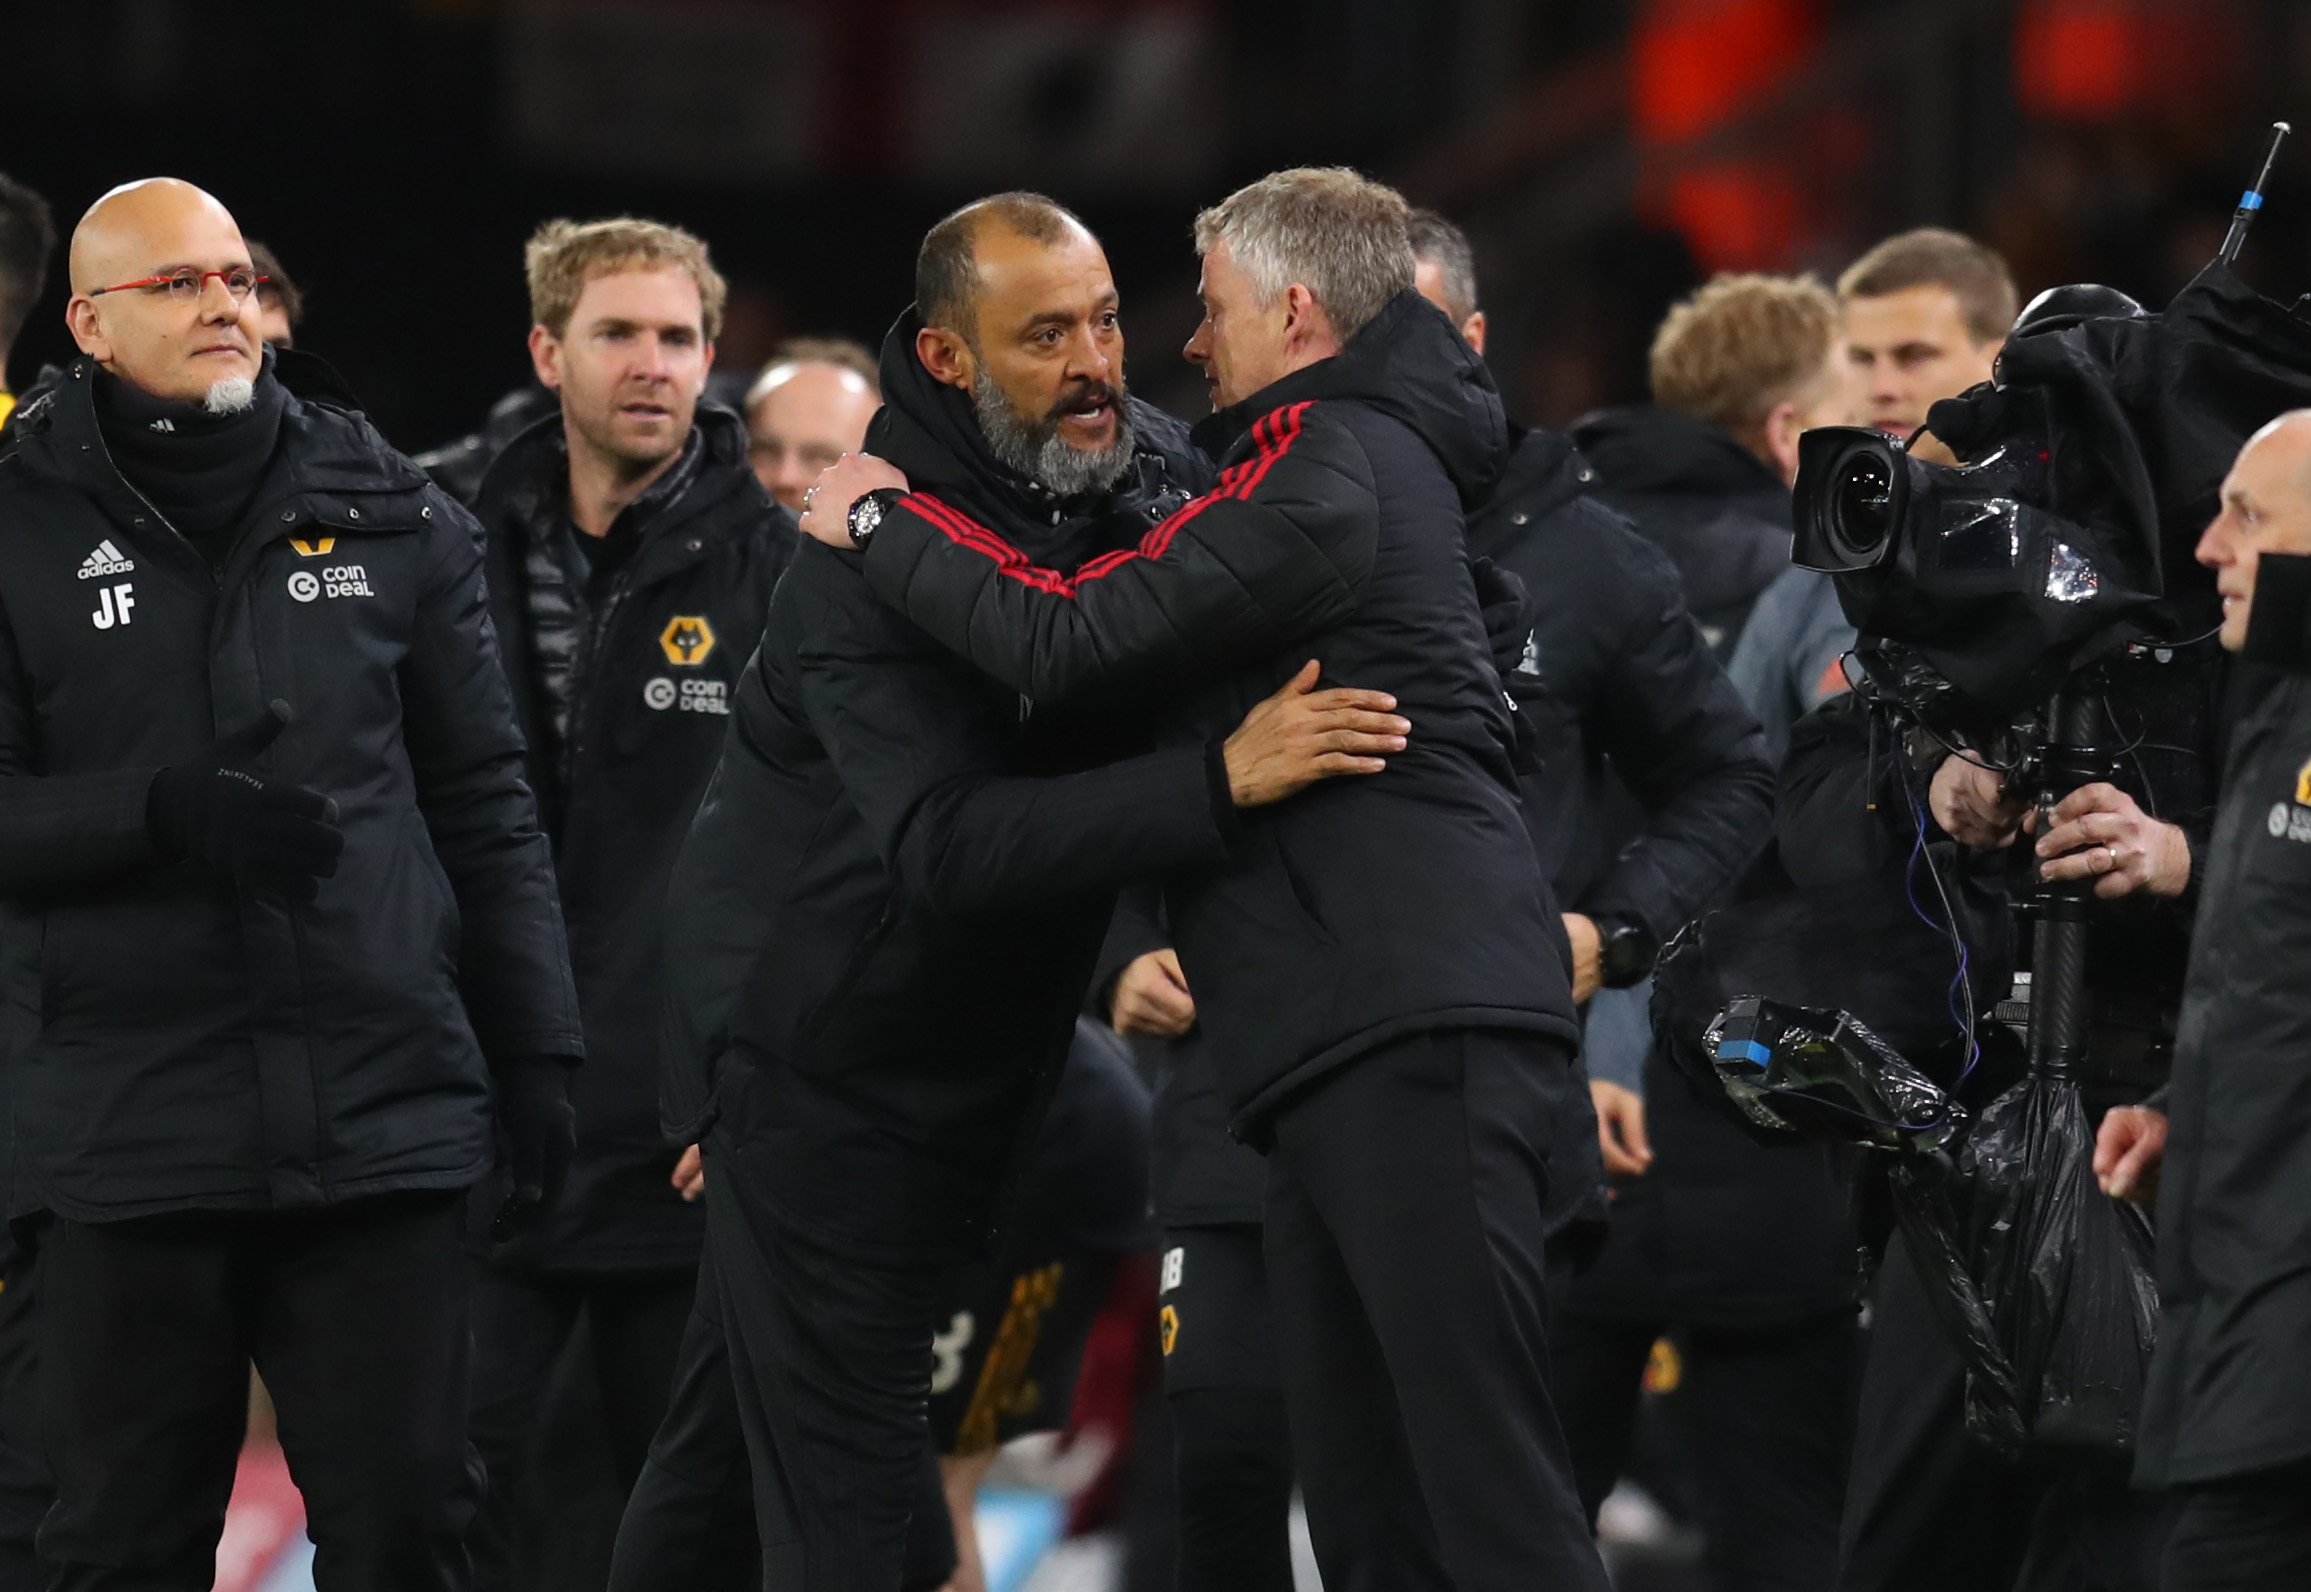 WOLVERHAMPTON, ENGLAND - MARCH 16: Nuno Espirito Santo manager of Wolverhampton Wanderers an Ole Gunnar Solskjaer interim manager of Manchester United hug after the FA Cup Quarter Final match between Wolverhampton Wanderers and Manchester United at Molineux on March 16, 2019 in Wolverhampton, England. (Photo by Catherine Ivill/Getty Images)